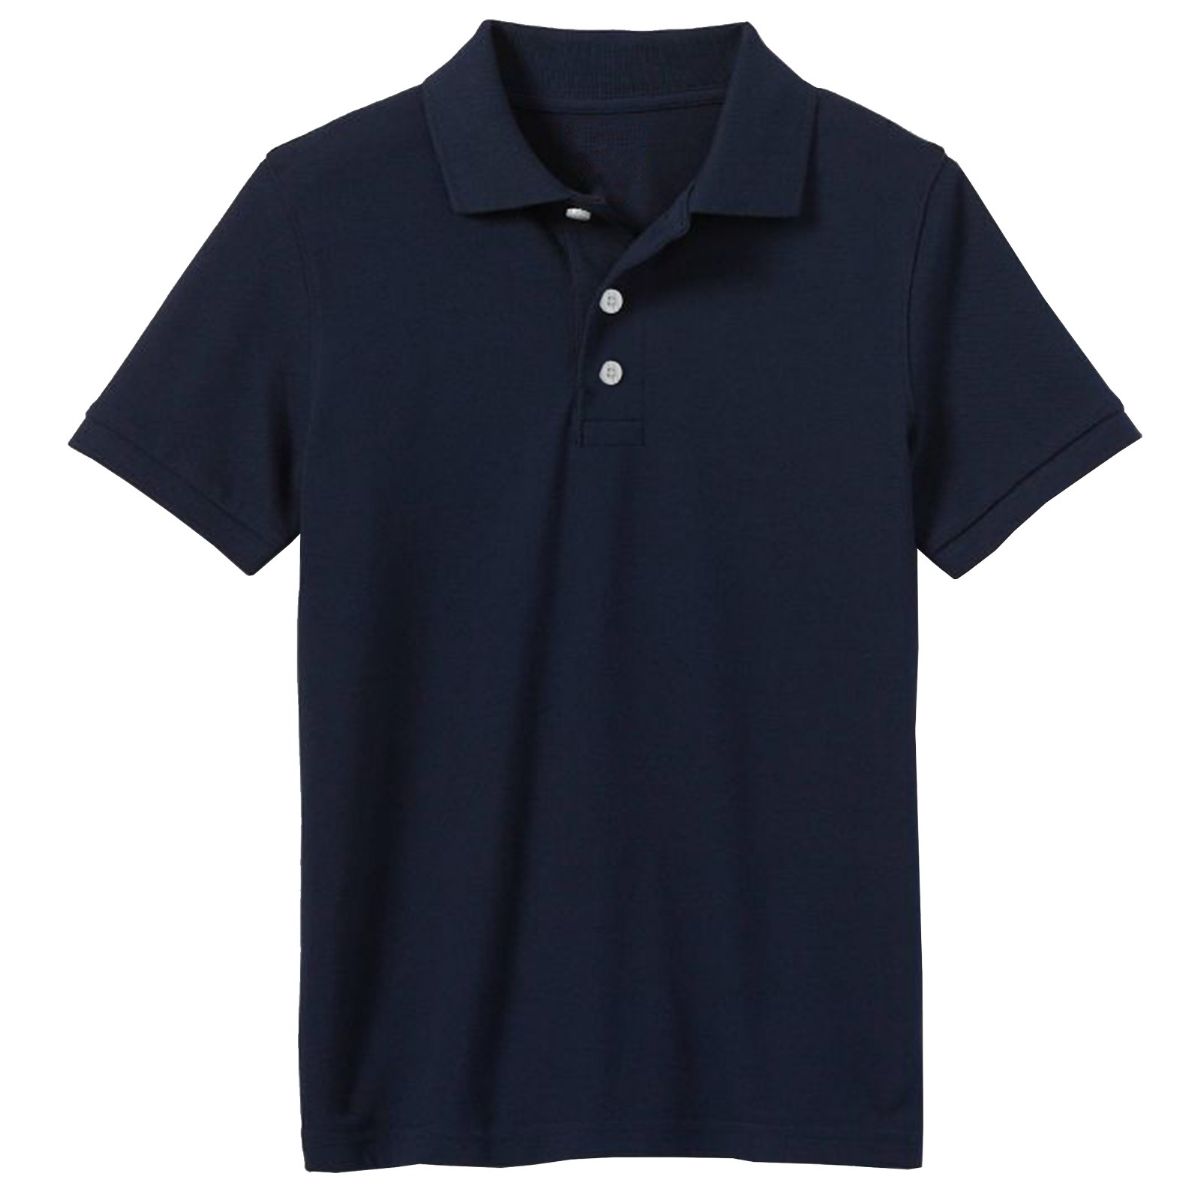 24 Pieces of Adult Polo Shirts Navy In Size S